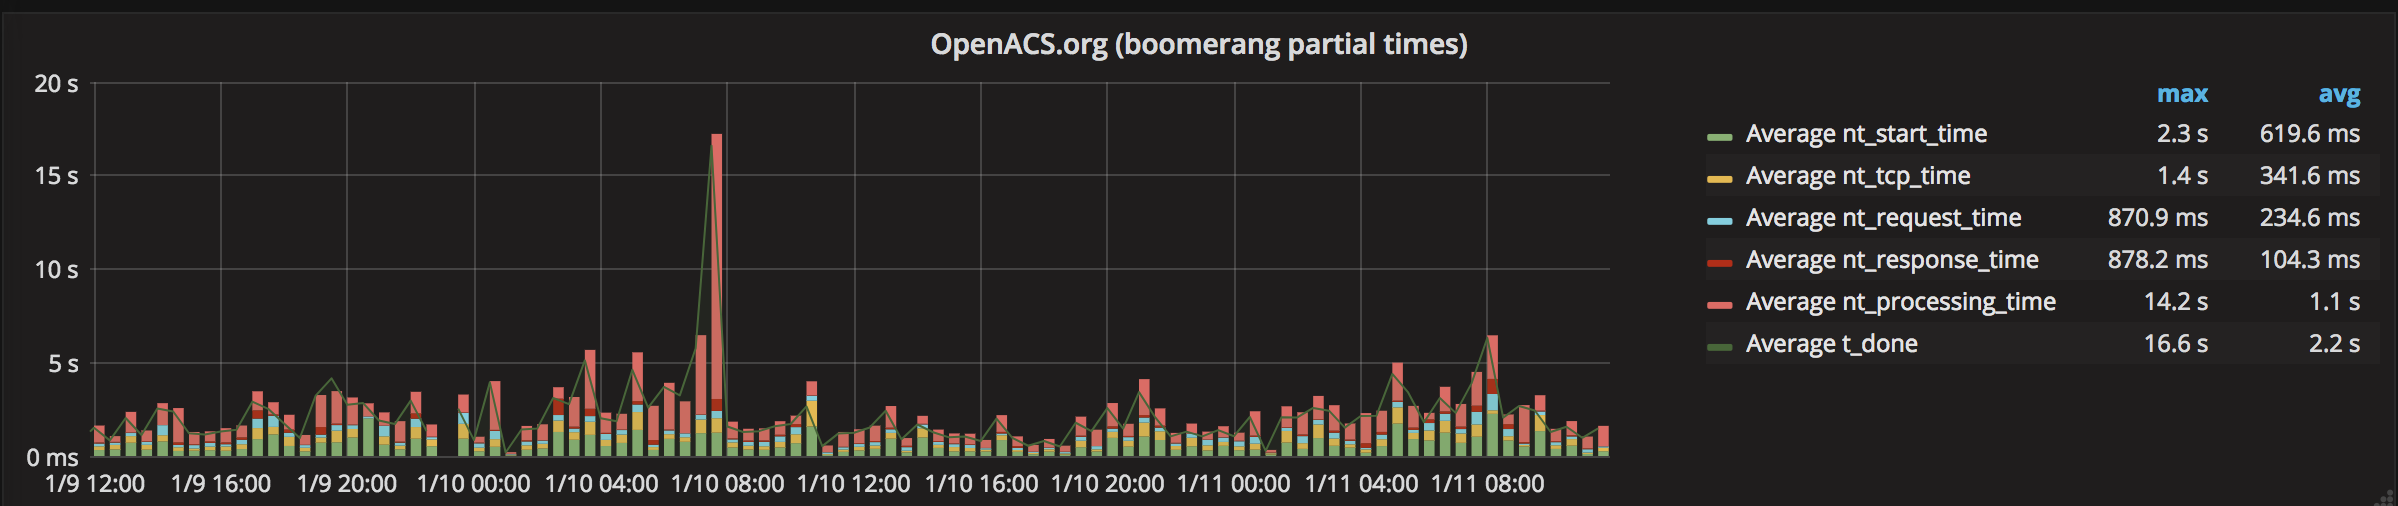 OpenACS performance 2 days